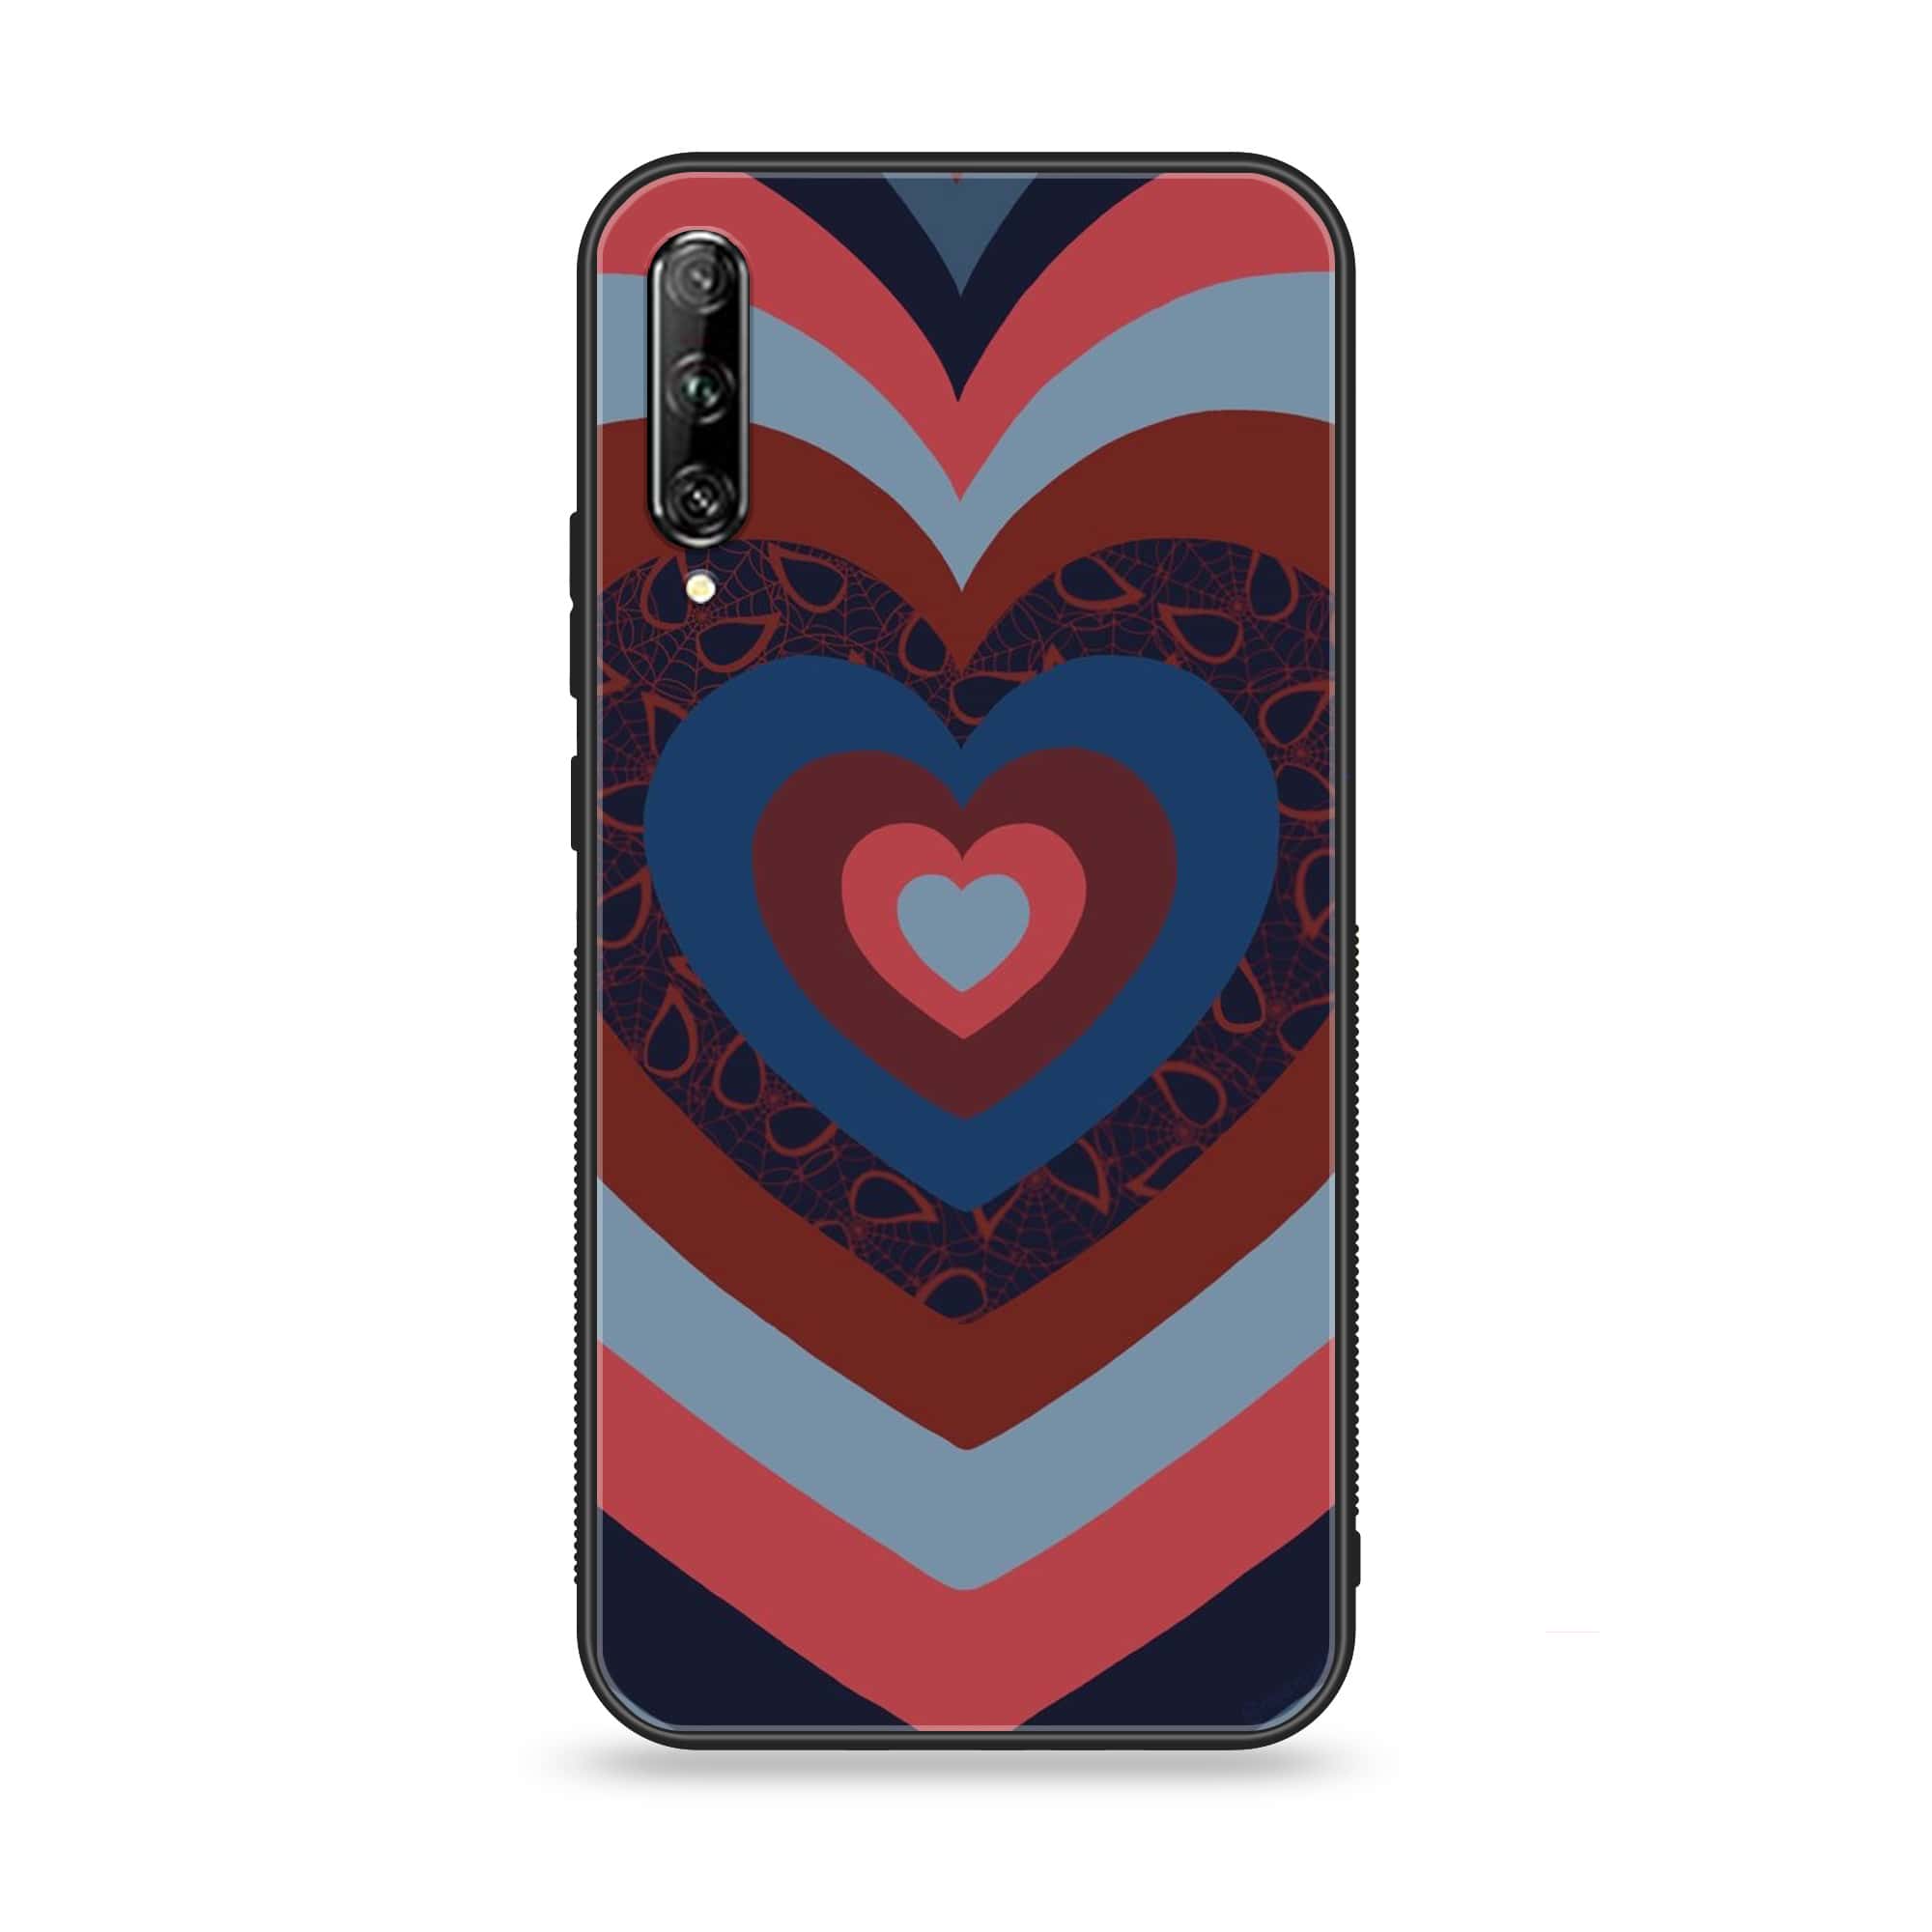 Huawei Y9s - Heart Beat 2.0 Series - Premium Printed Glass soft Bumper shock Proof Case